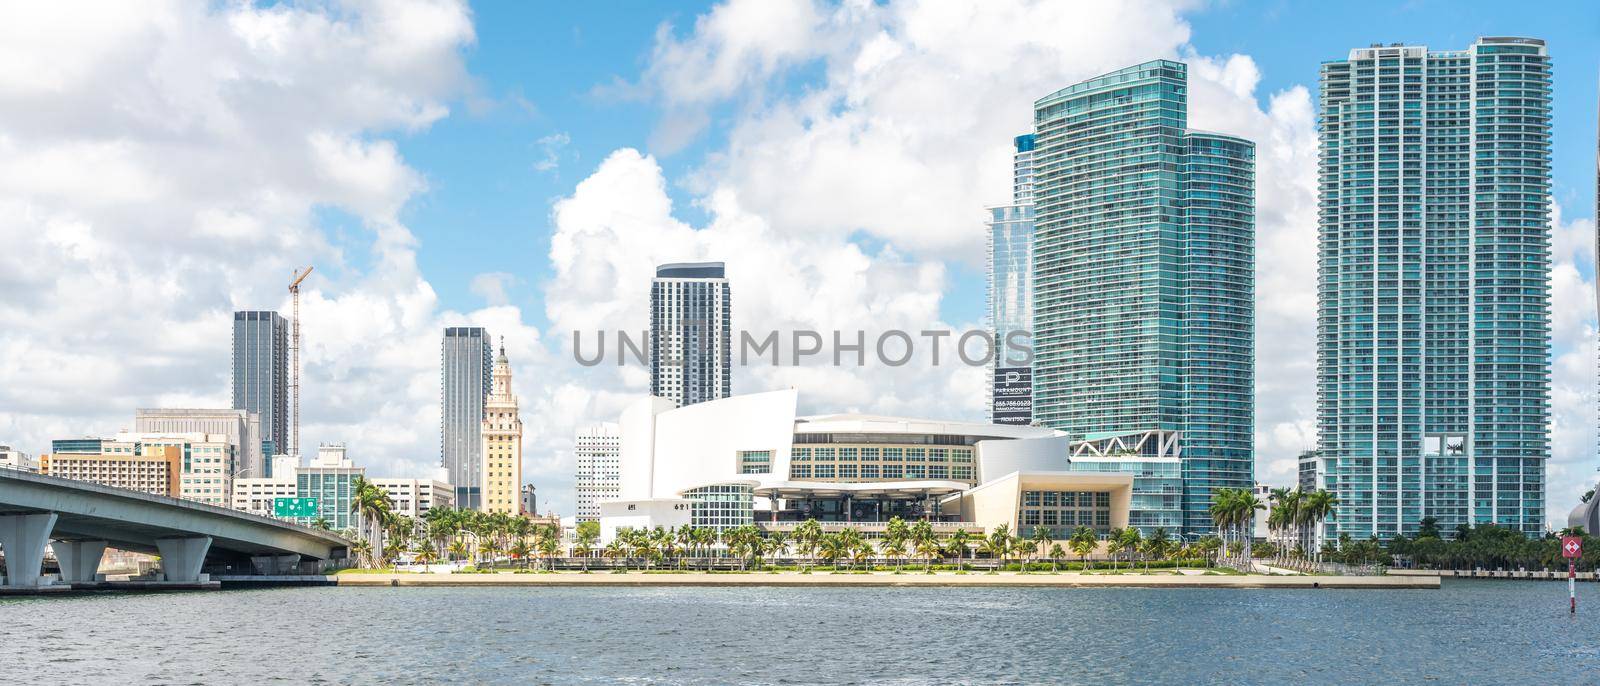 Miami, USA - September 11, 2019: American Airlines arena in downtown Miami, Florida by Mariakray